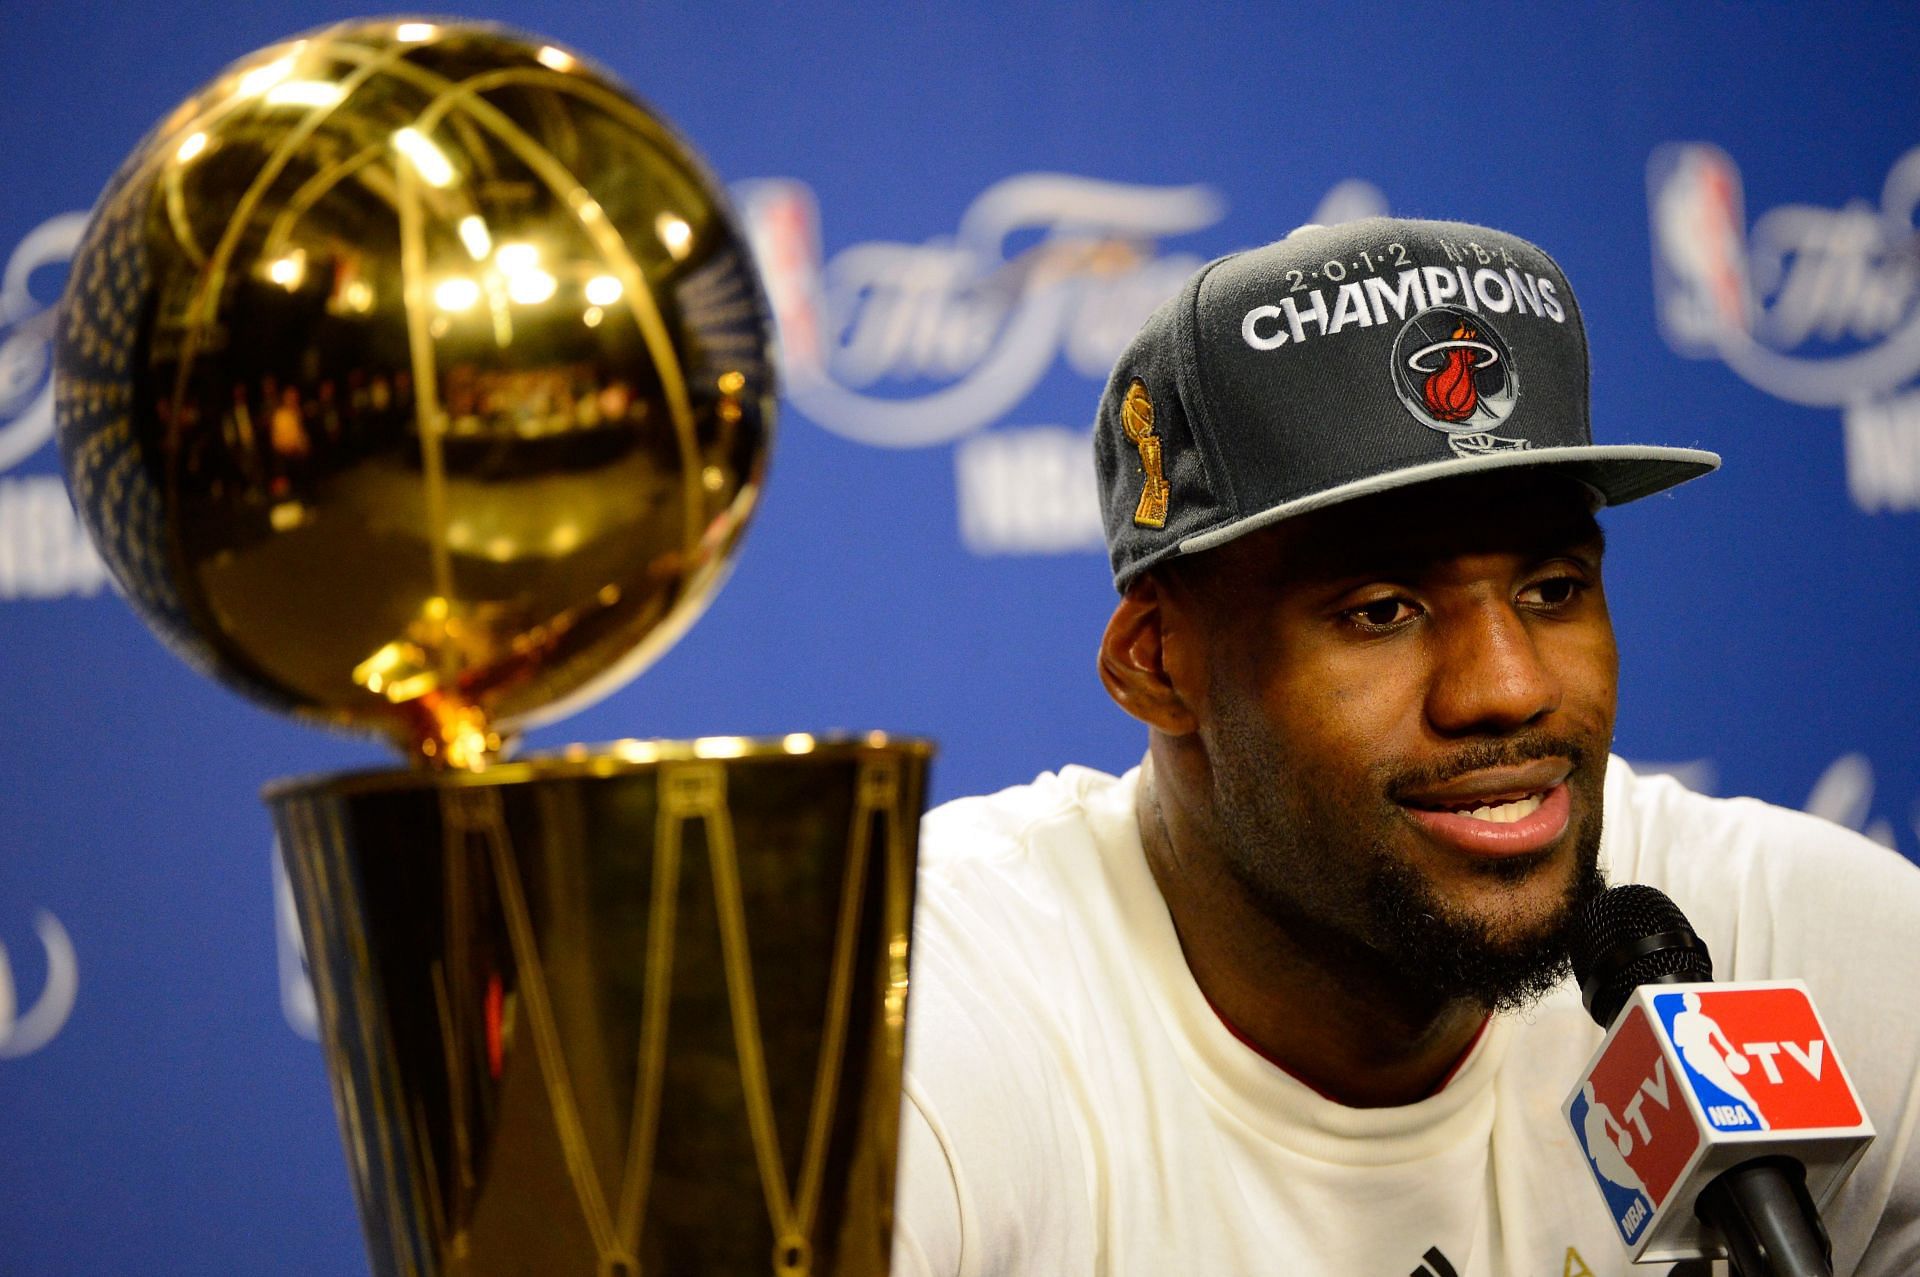 LeBron James #6 of the Miami Heatt (Photo by Ronald Martinez/Getty Images)